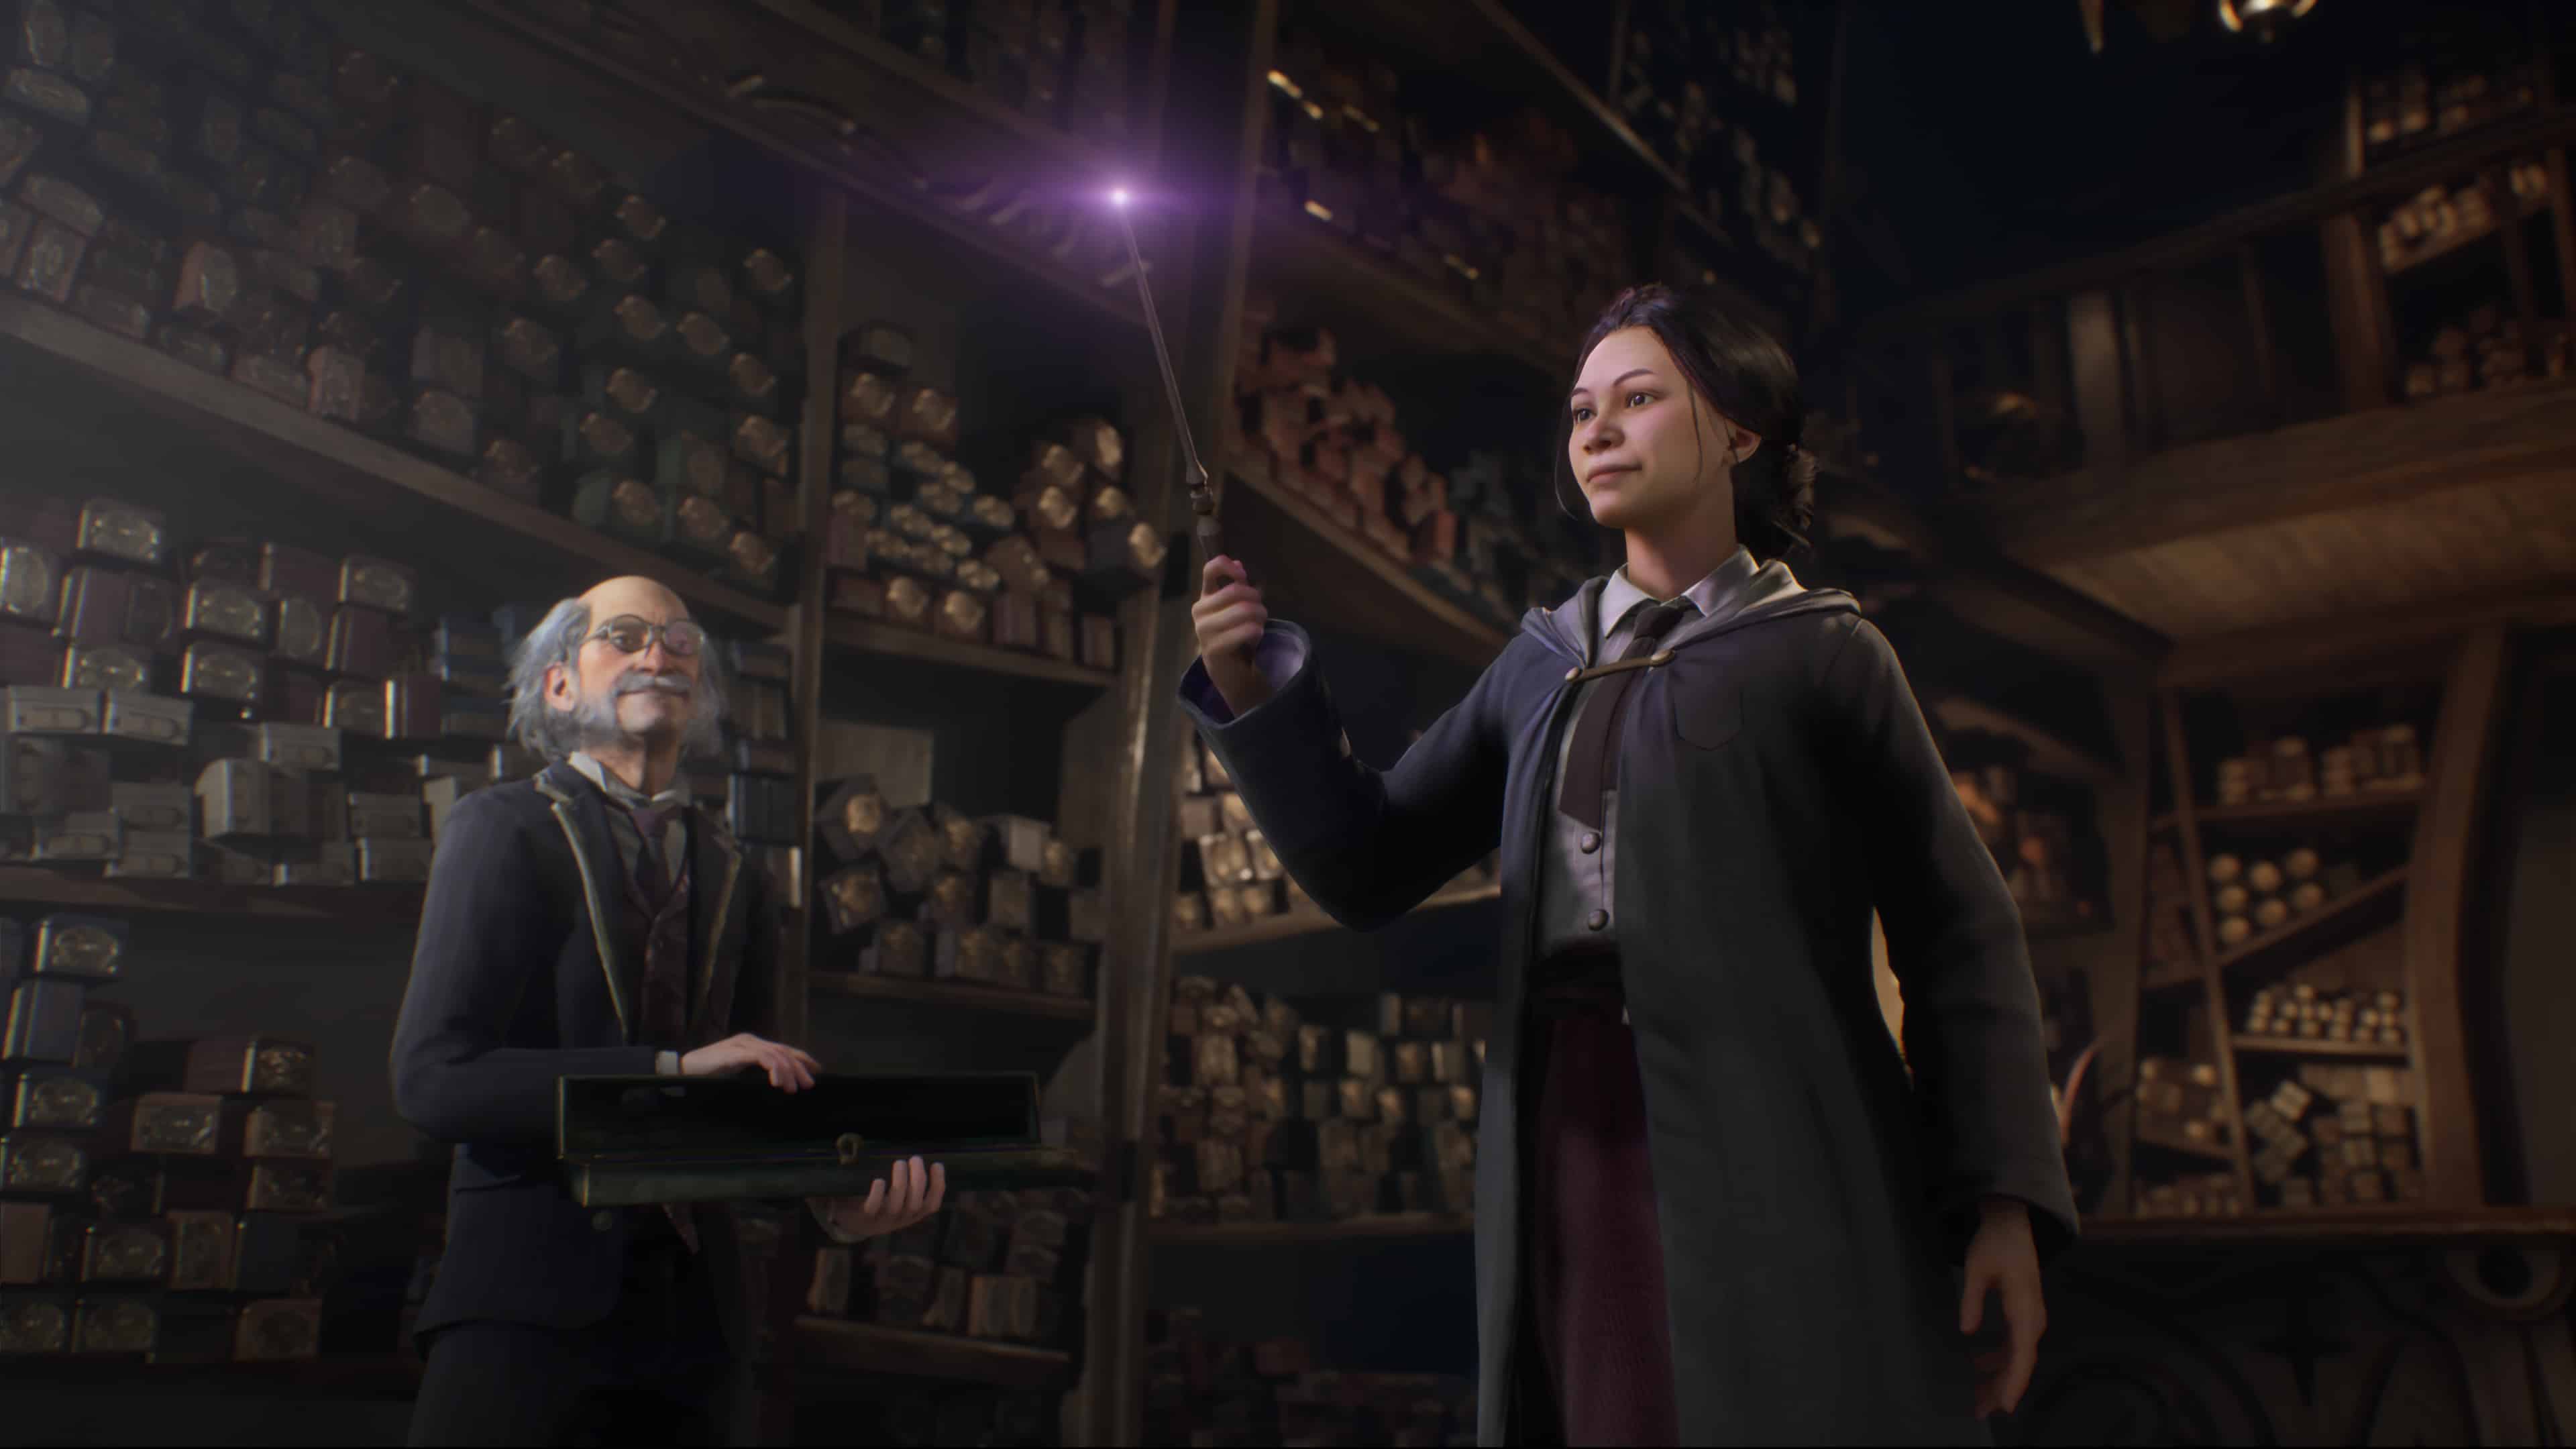 hogwarts legacy ps4 release date